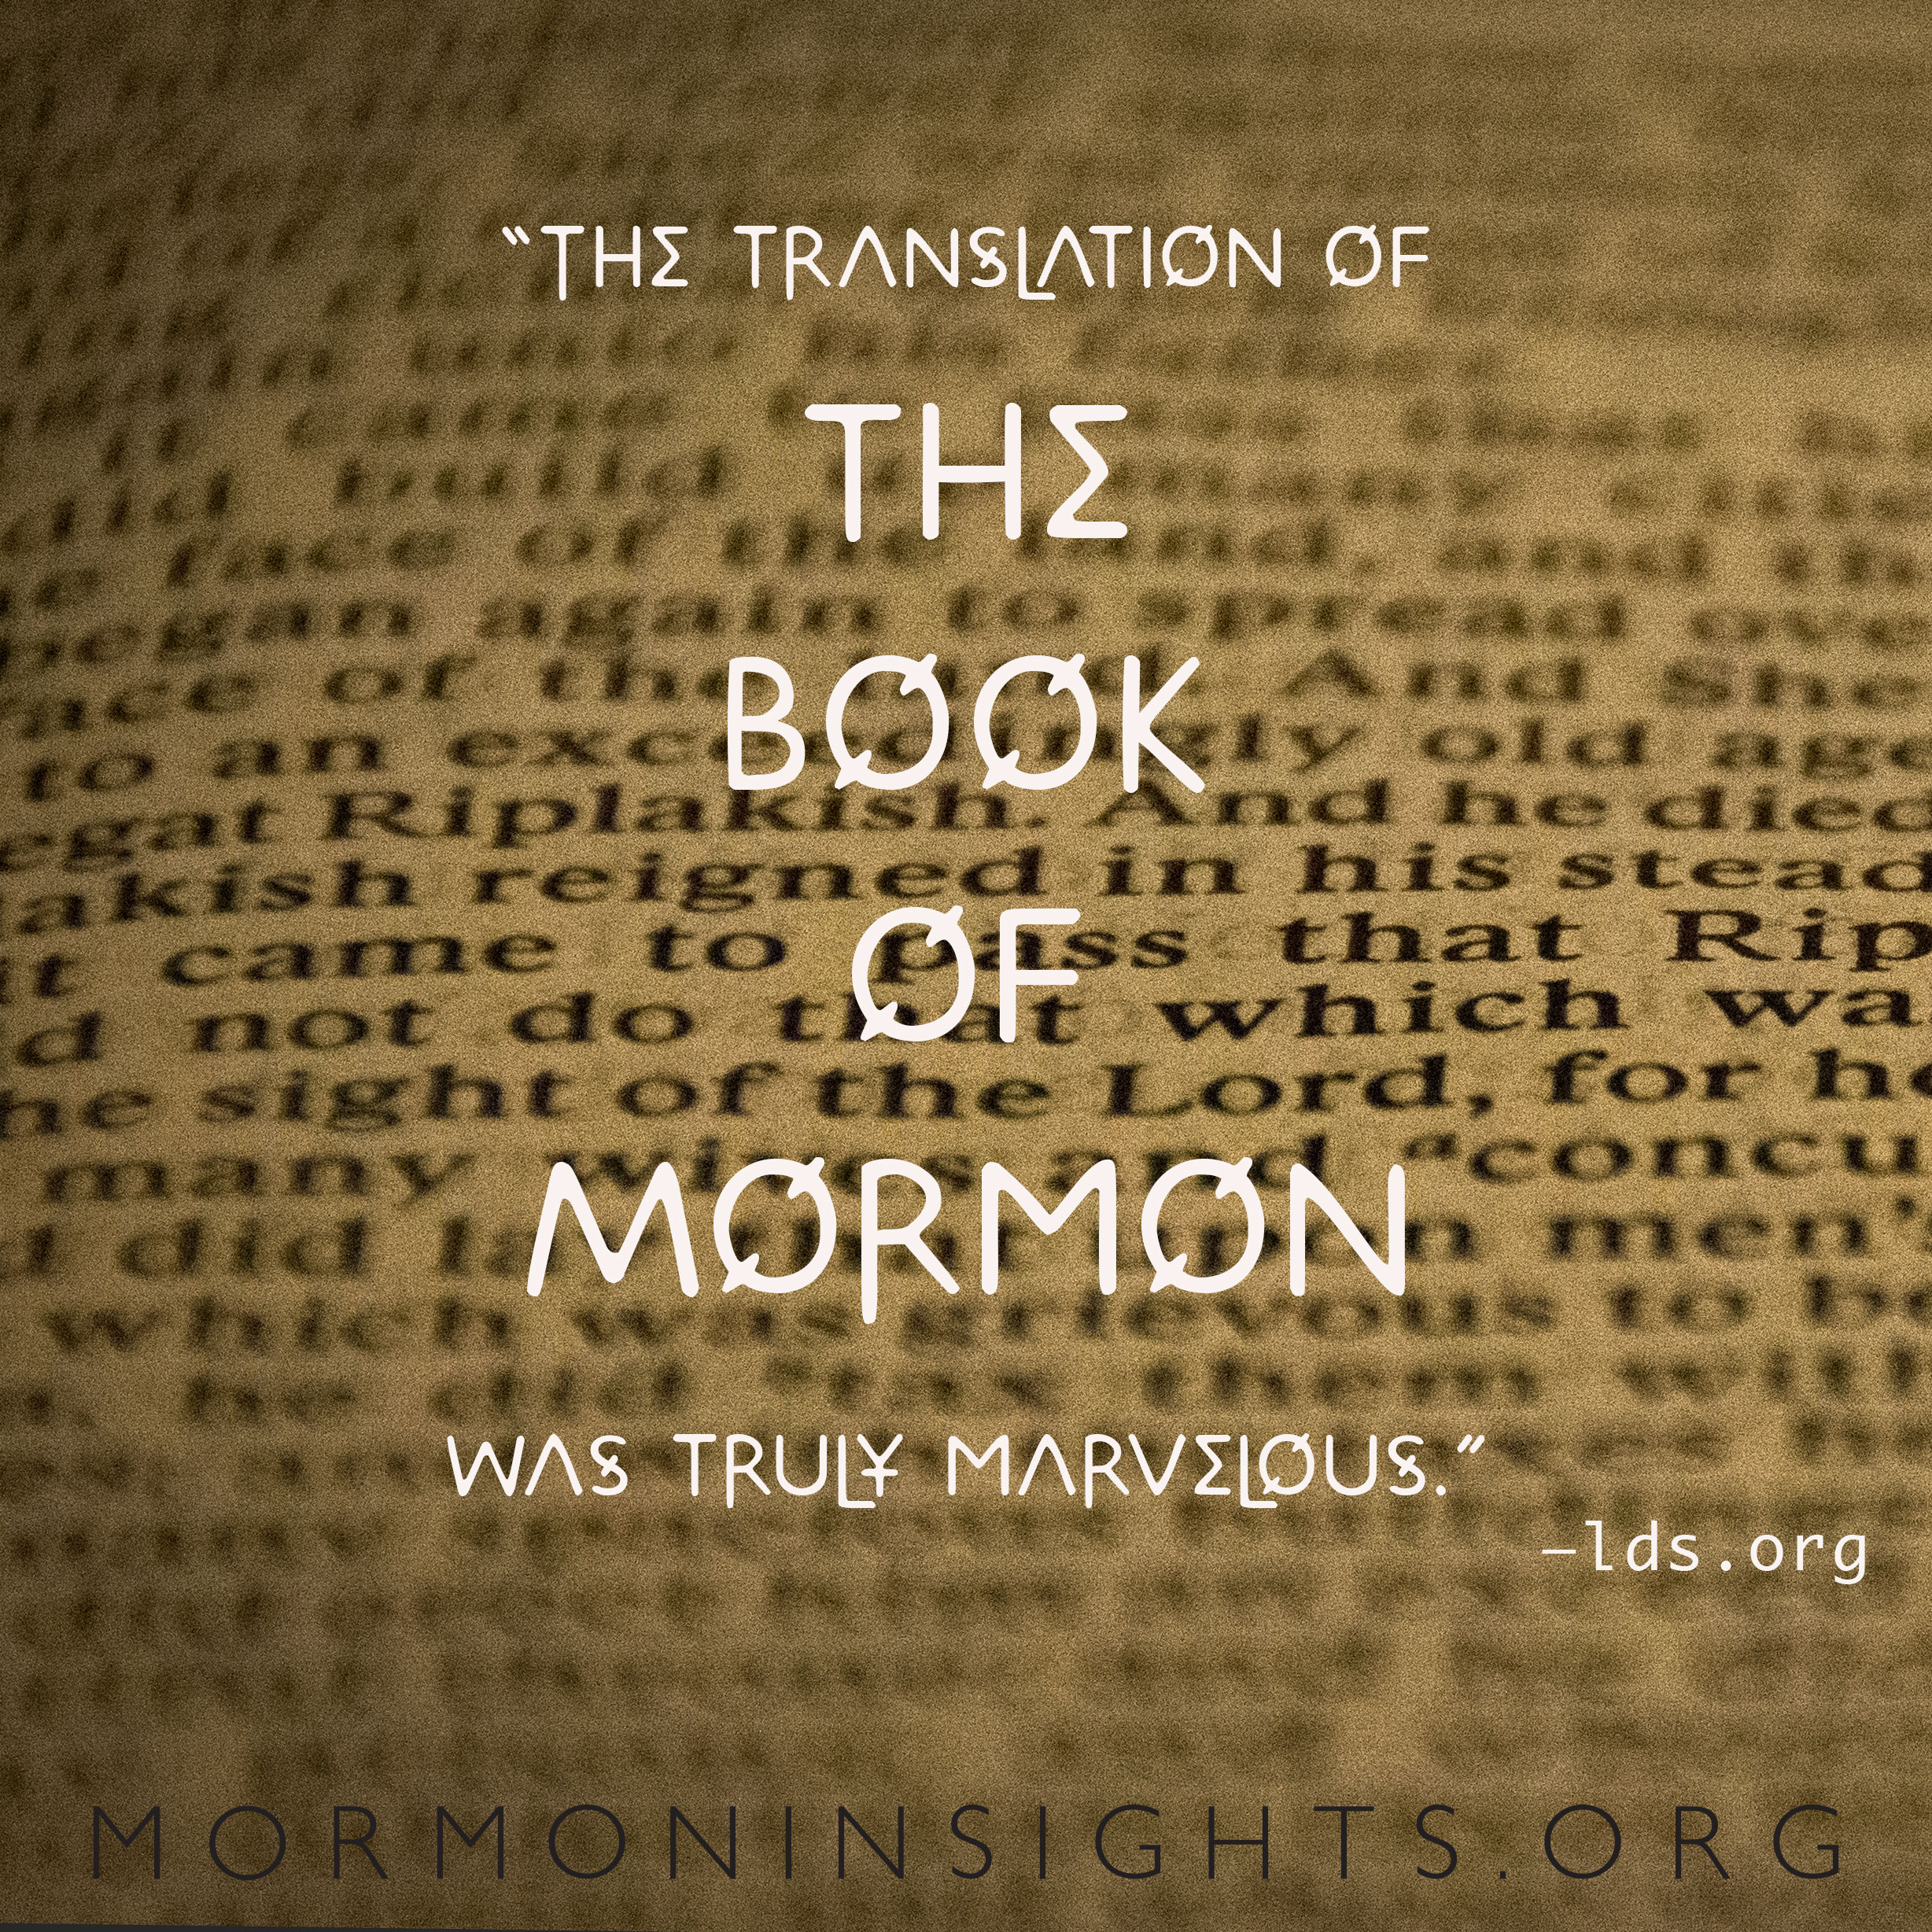 "The translation of the book of mormon was true."